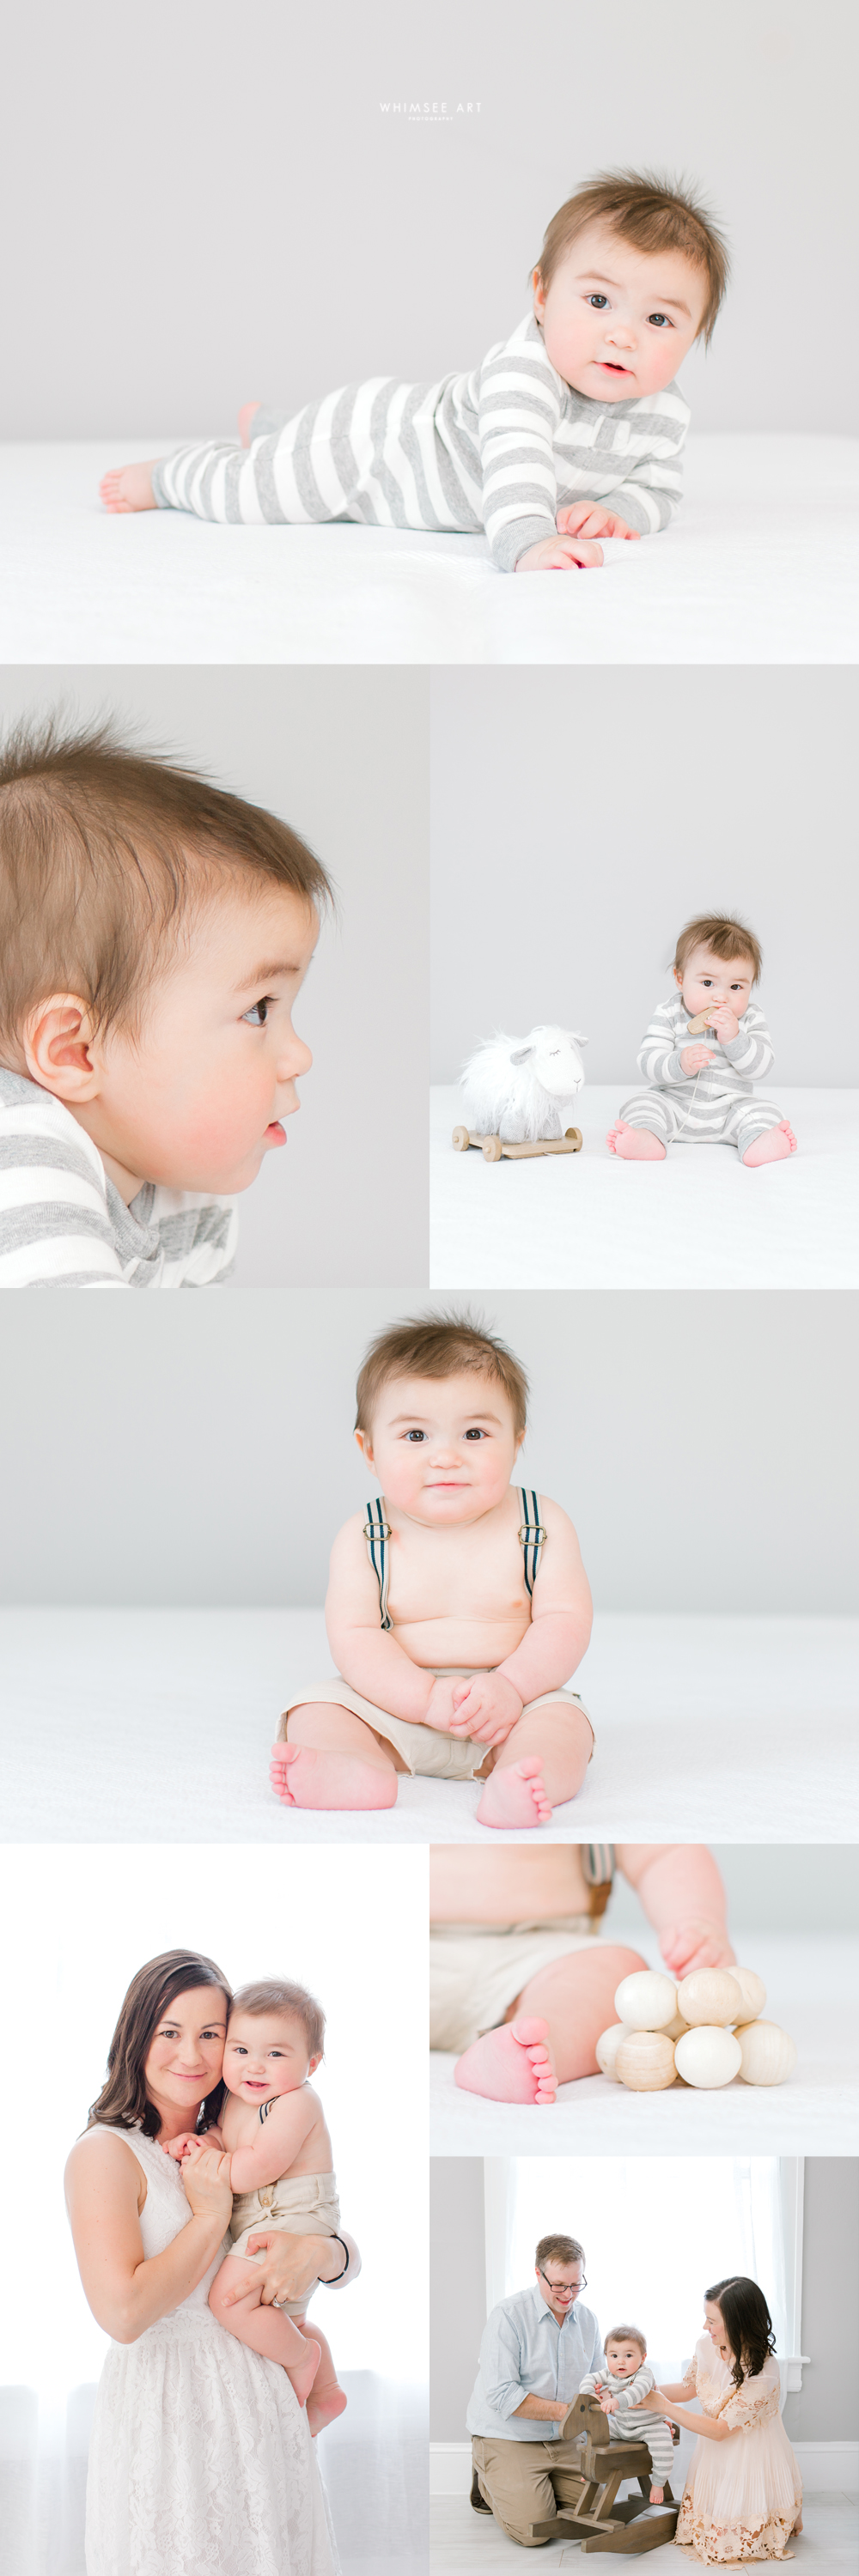 Contemporary Child Photography | Child Photography | Whimsee Art Photography